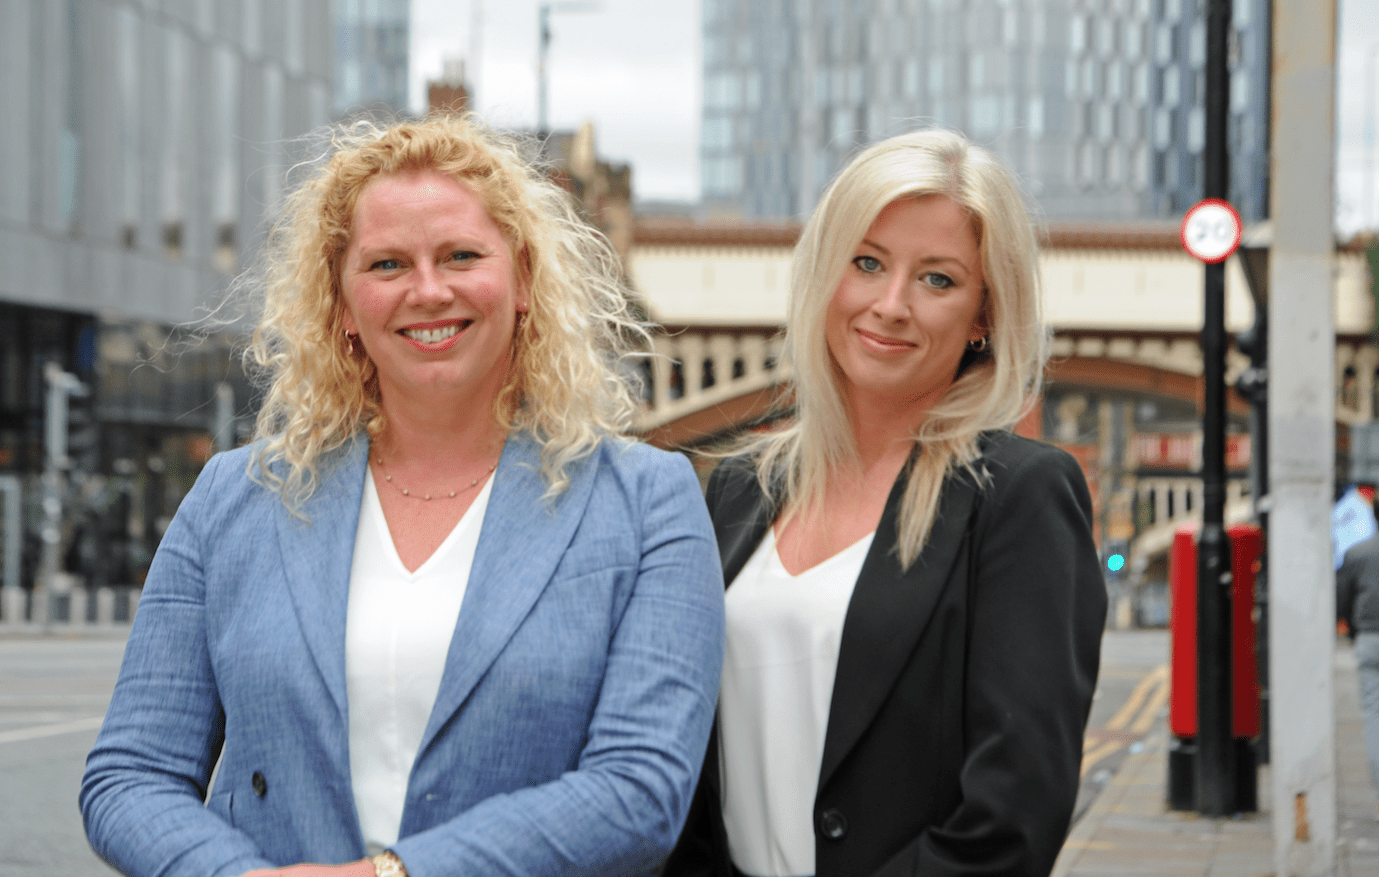 Emma and Leanne have been promoted at HCC Solicitors